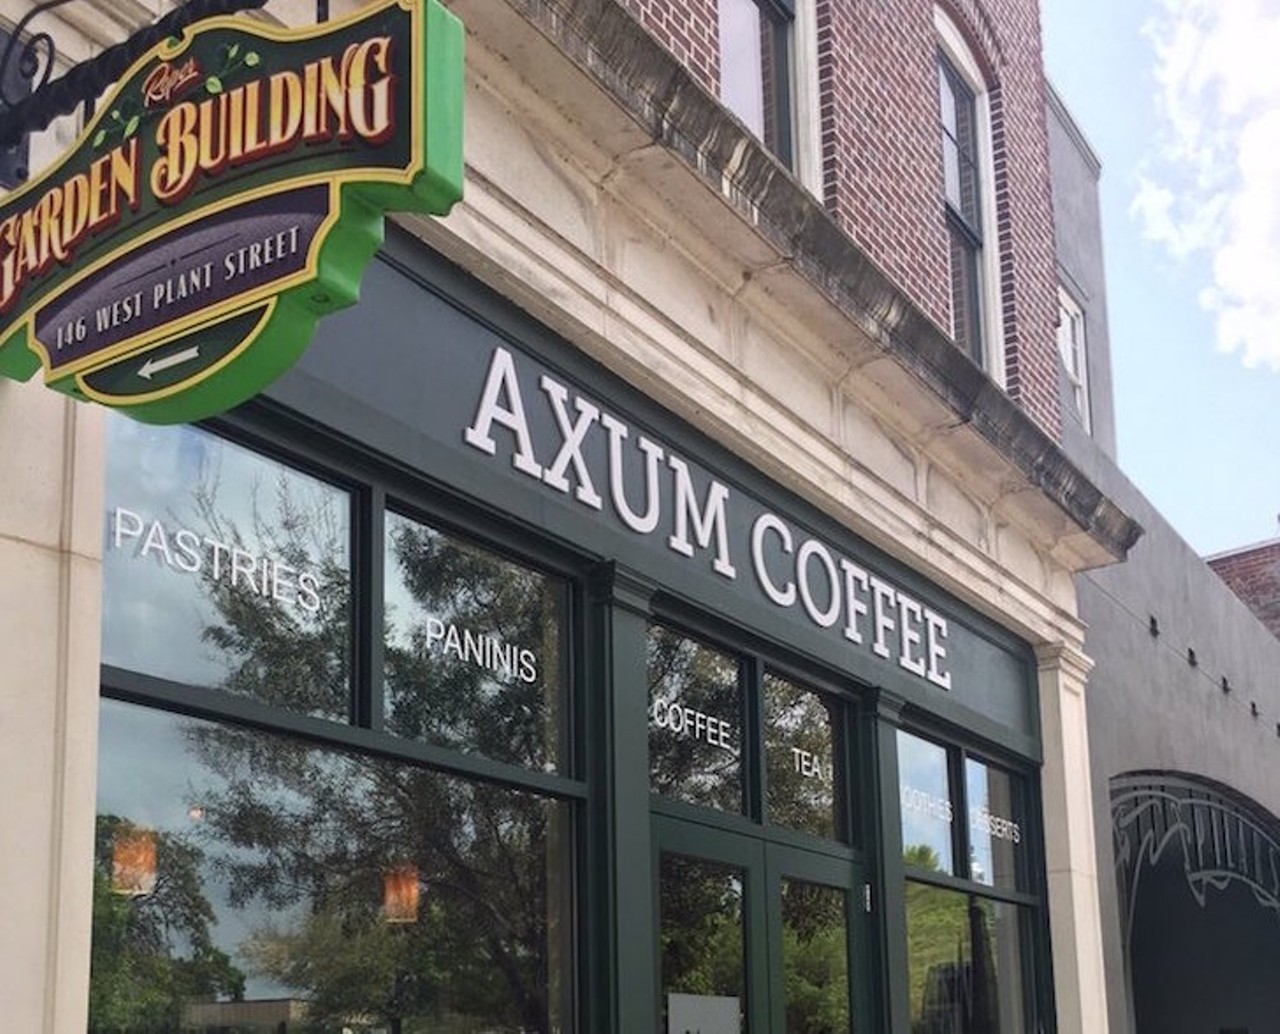 Axum Coffee  
146 W. Plant St., 407-654-7900
This place stands out for their creative coffee selections like charcoal lattes and special seasonal drink. They even have events for things like latte art to learn how to make beautiful designs in your next cup. 
Photo via Yelp/Chantel H.